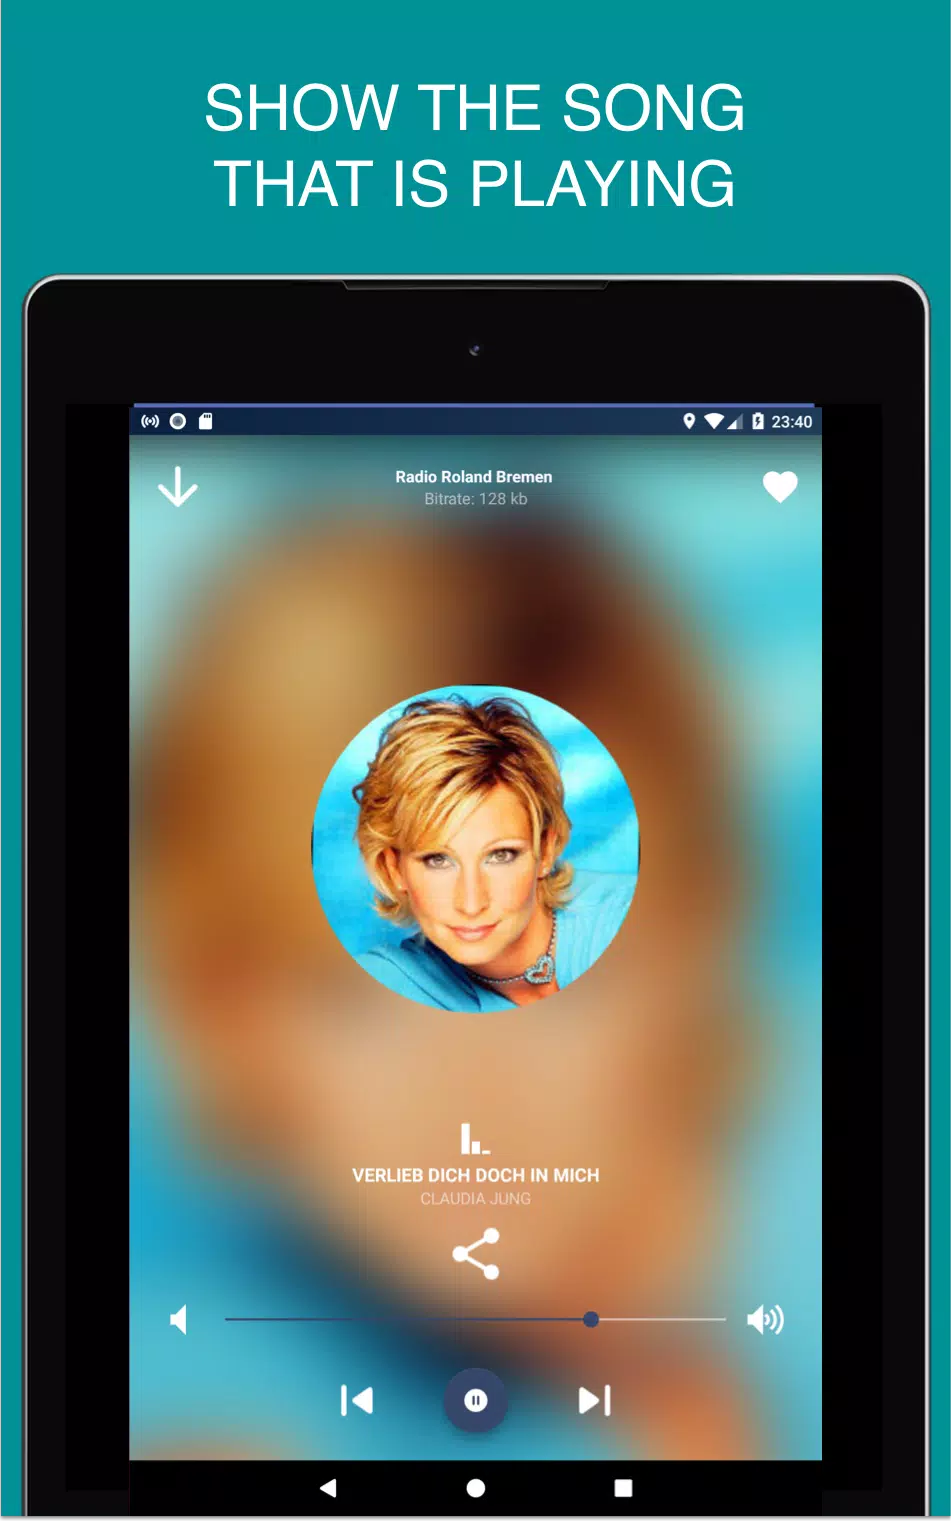 Radio Roland Bremen App Free Live for Android - APK Download